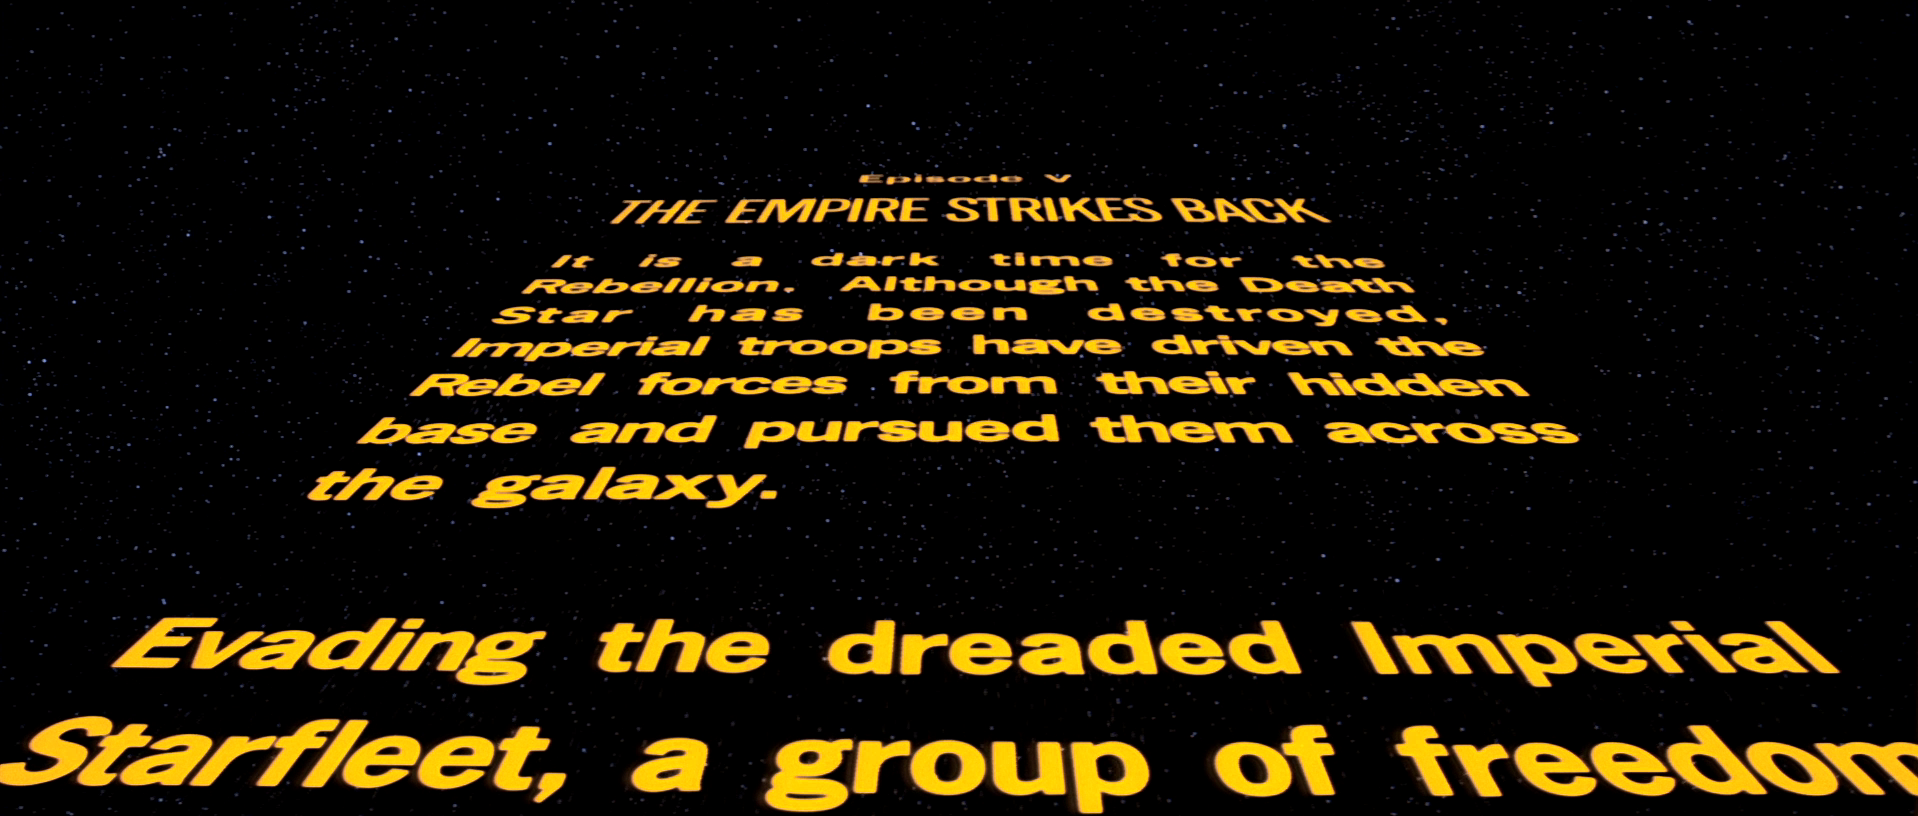 Star Wars opening crawl based on CSS animations and transformations